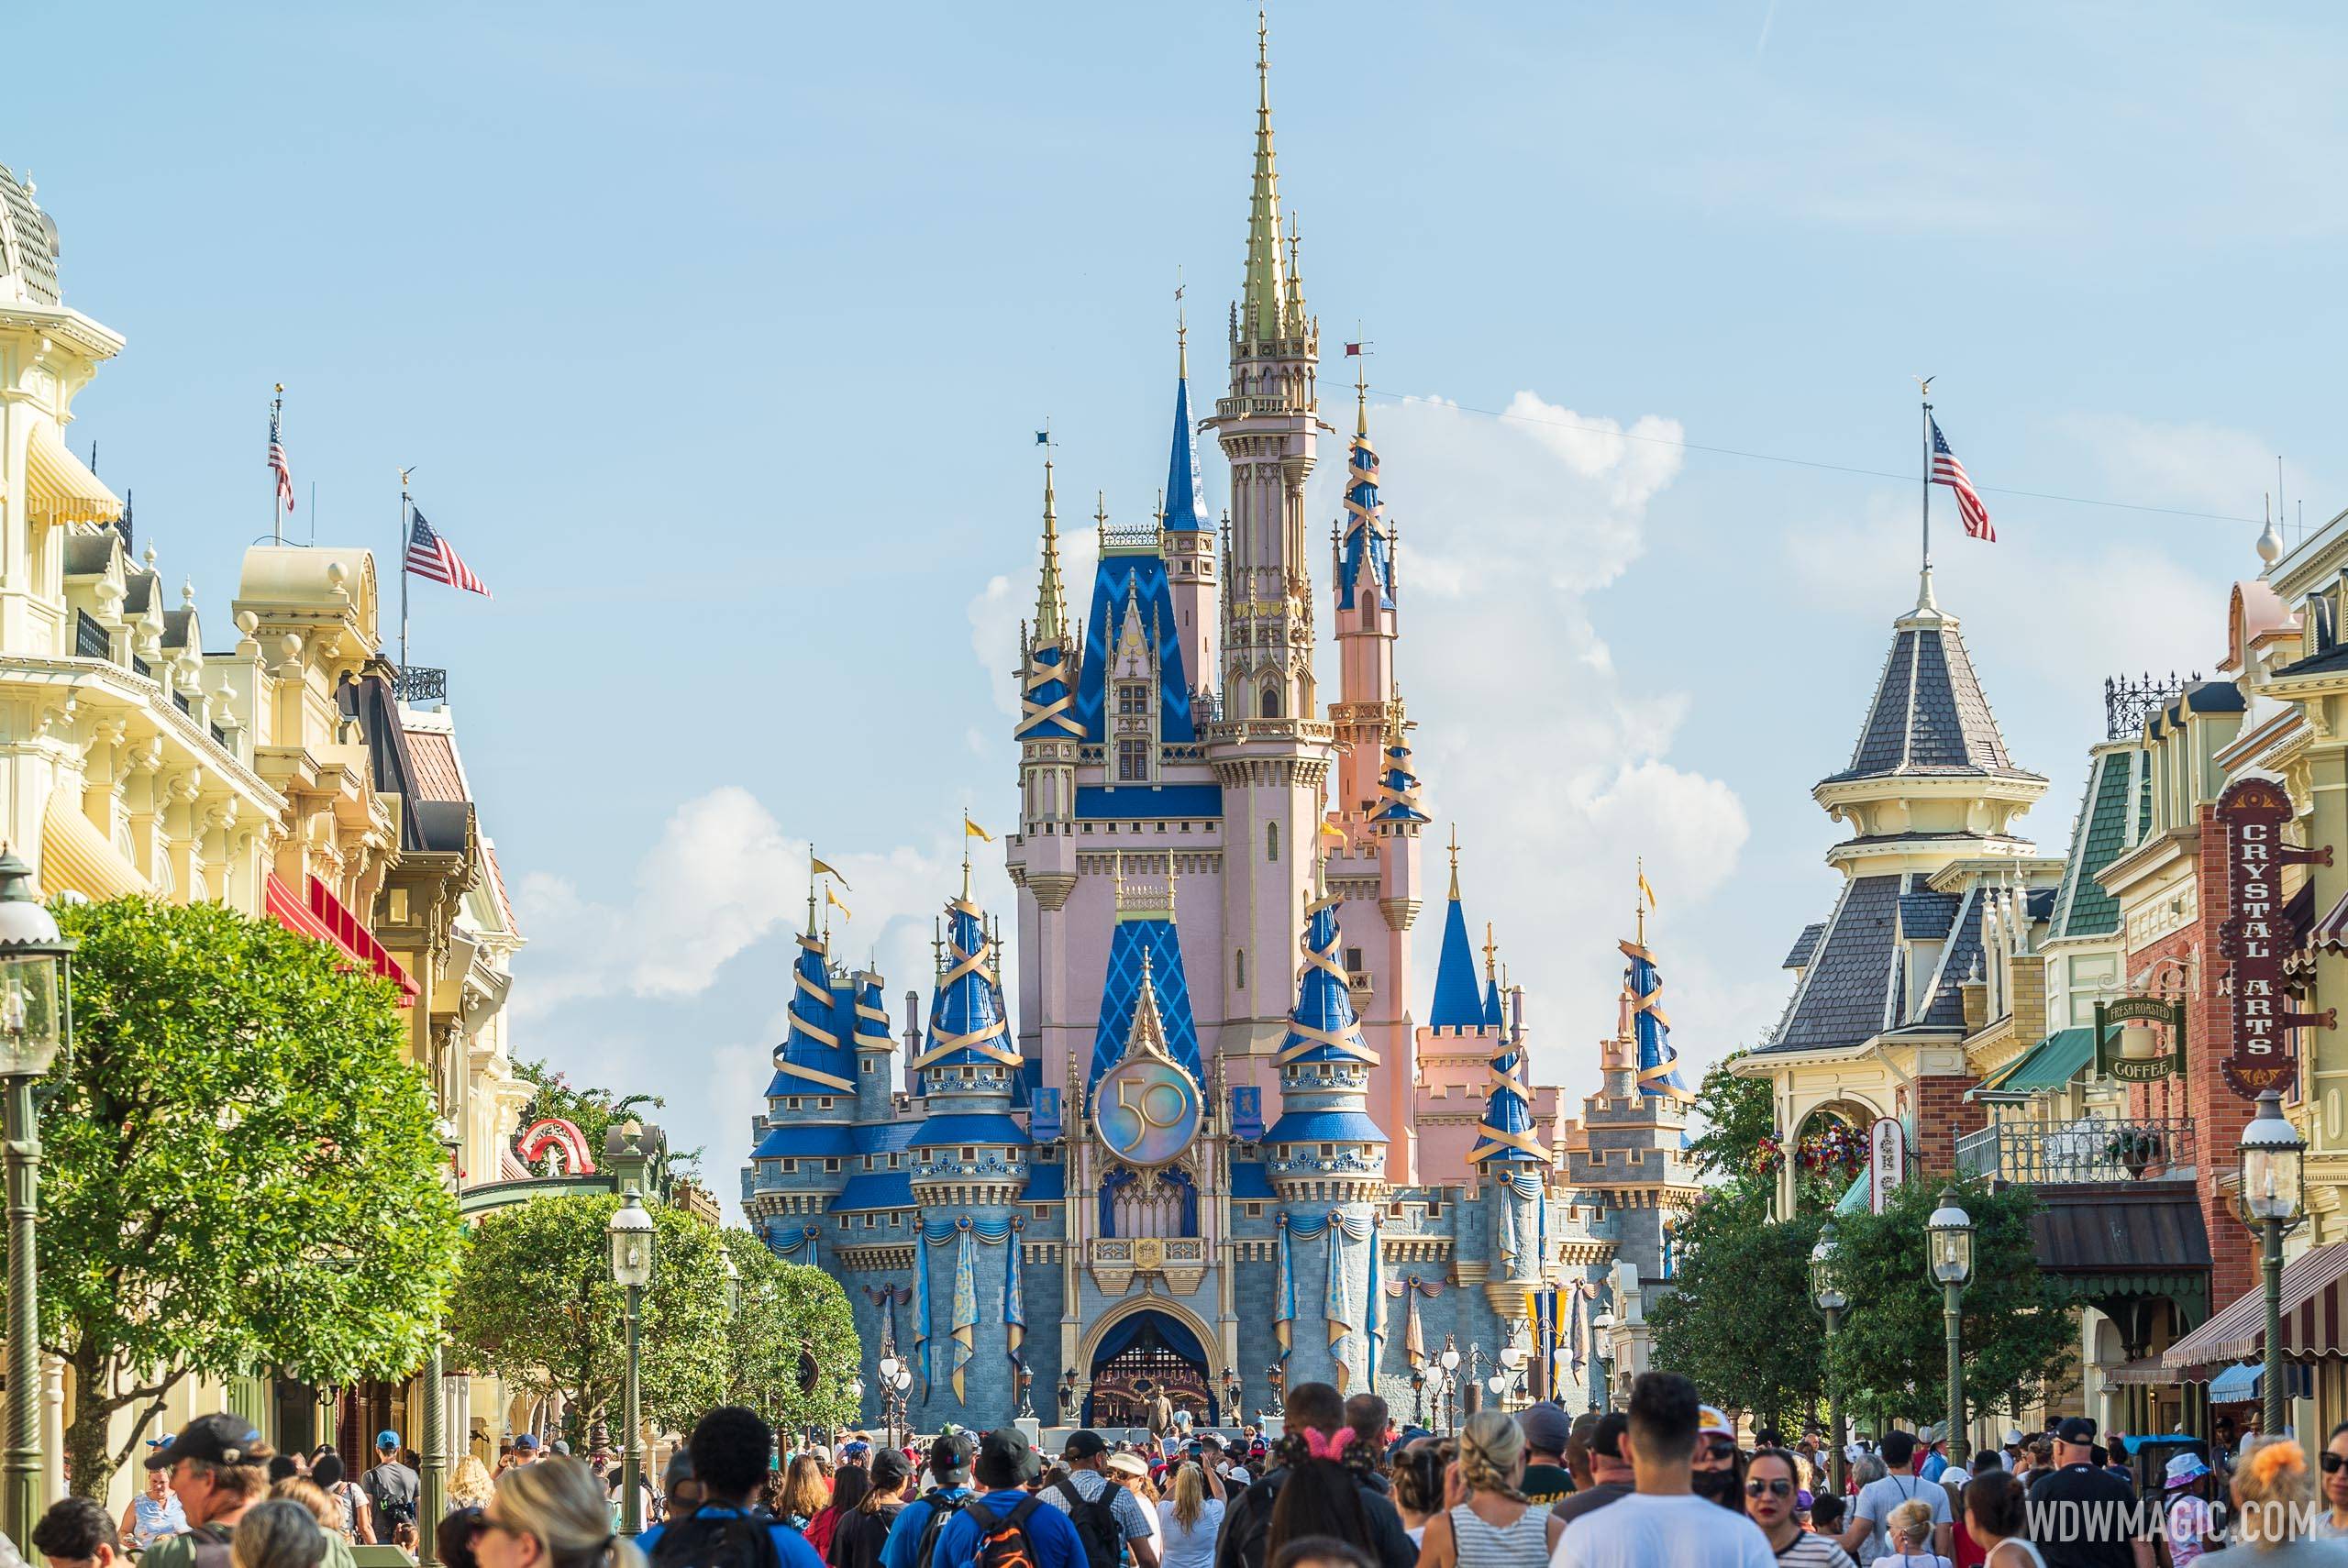 All Cast members at Walt Disney World will soon be vaccinated against COVID-19